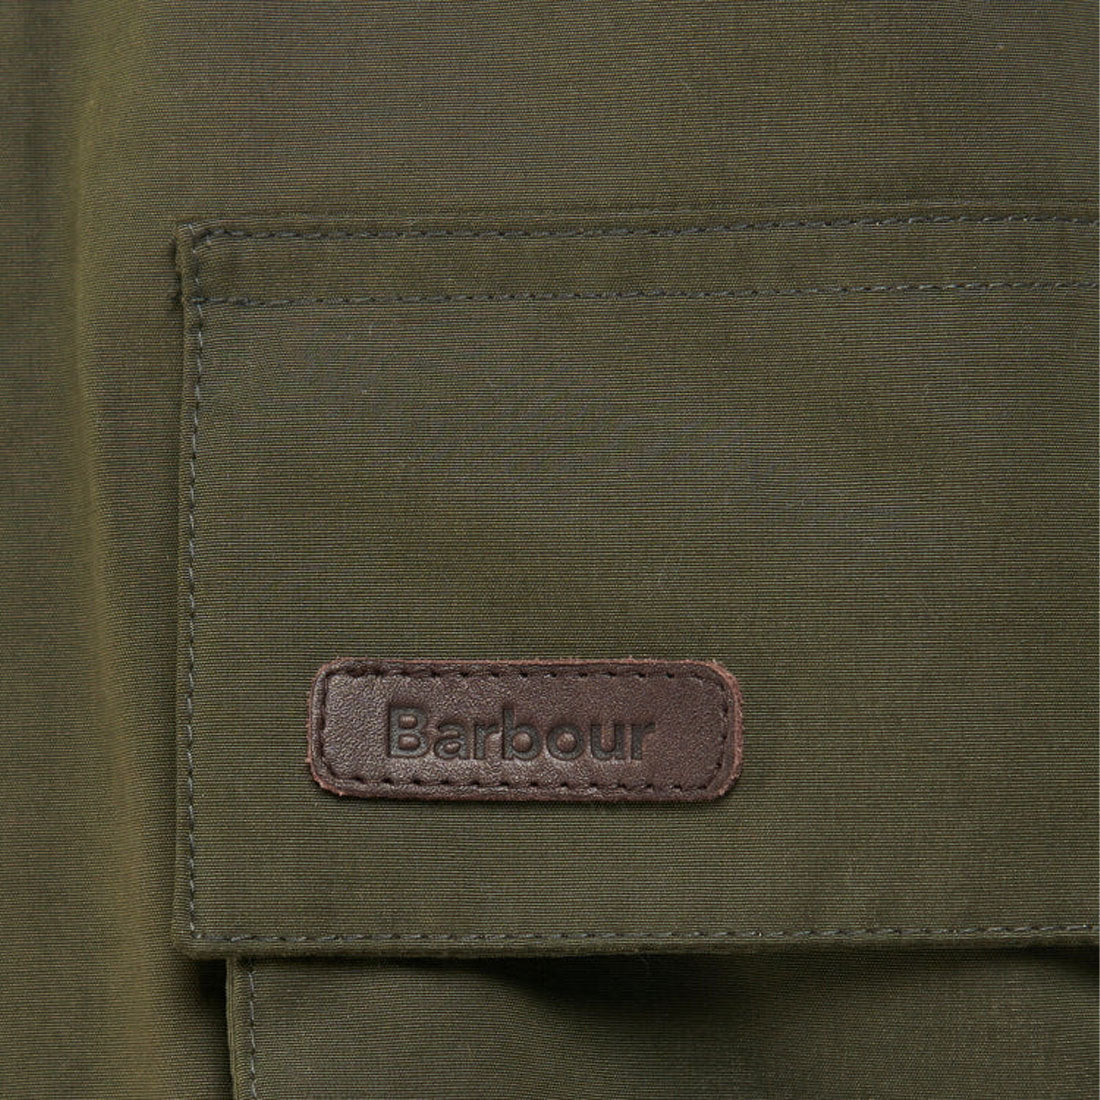 Barbour Womens Beaconsfield Jacket Olive | The Sporting Lodge